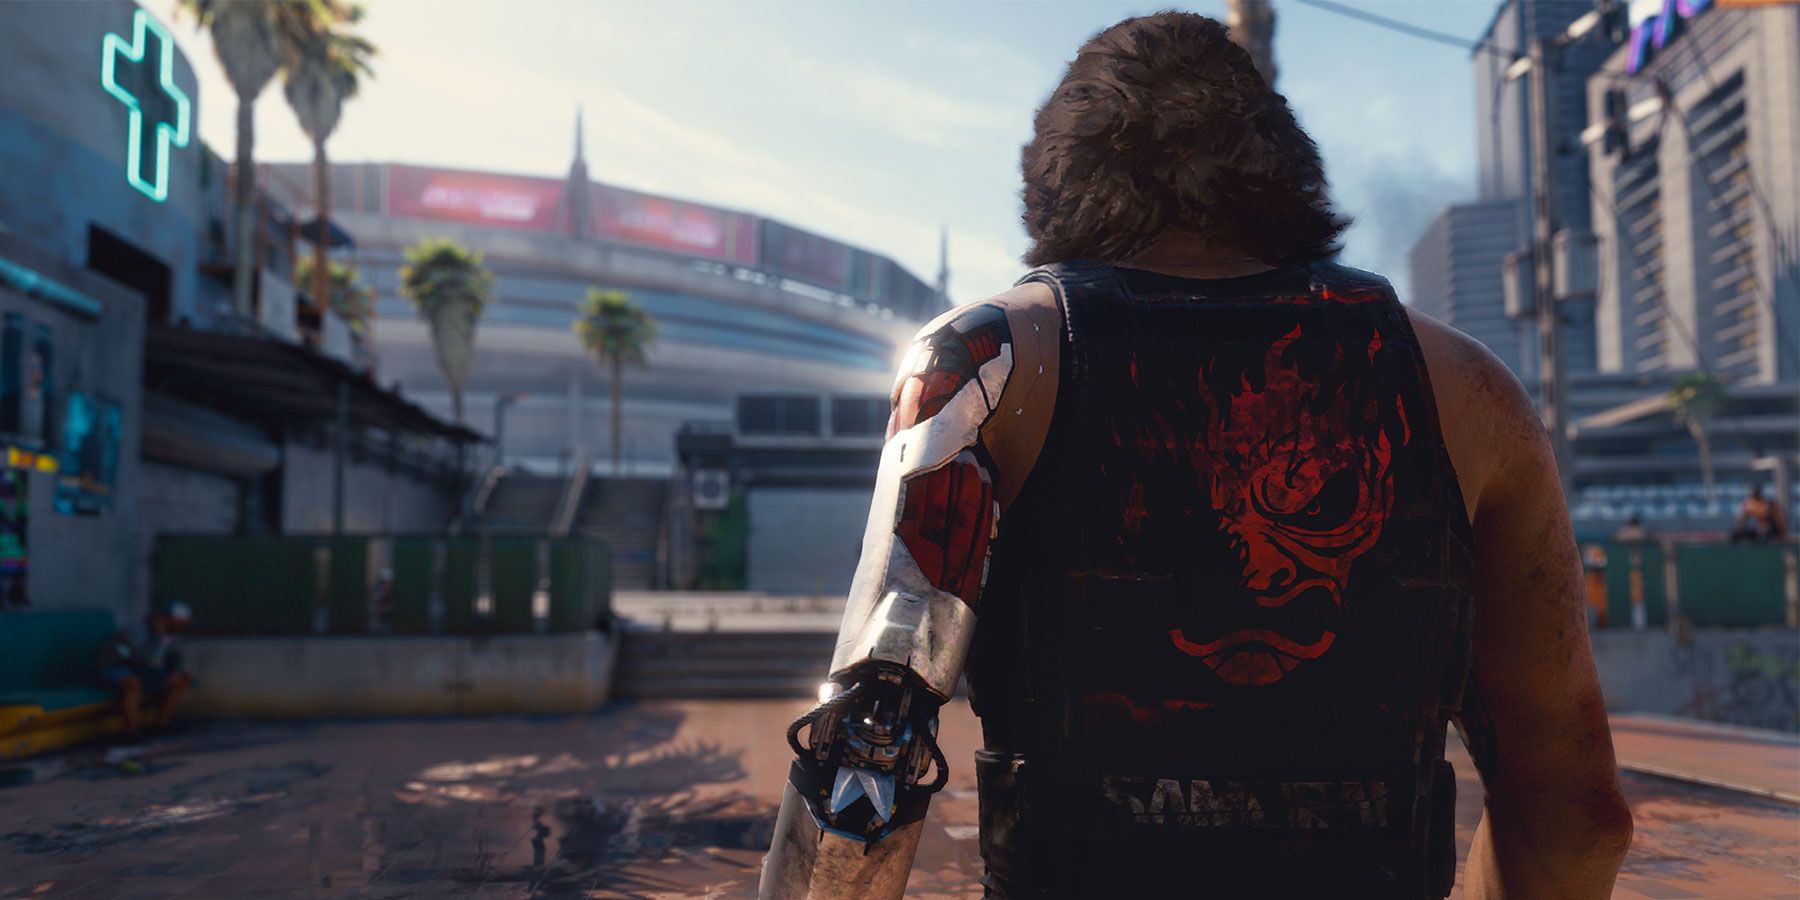 cyberpunk 2077 players are speculating about ps5 and xbox series x upgrades 1.5